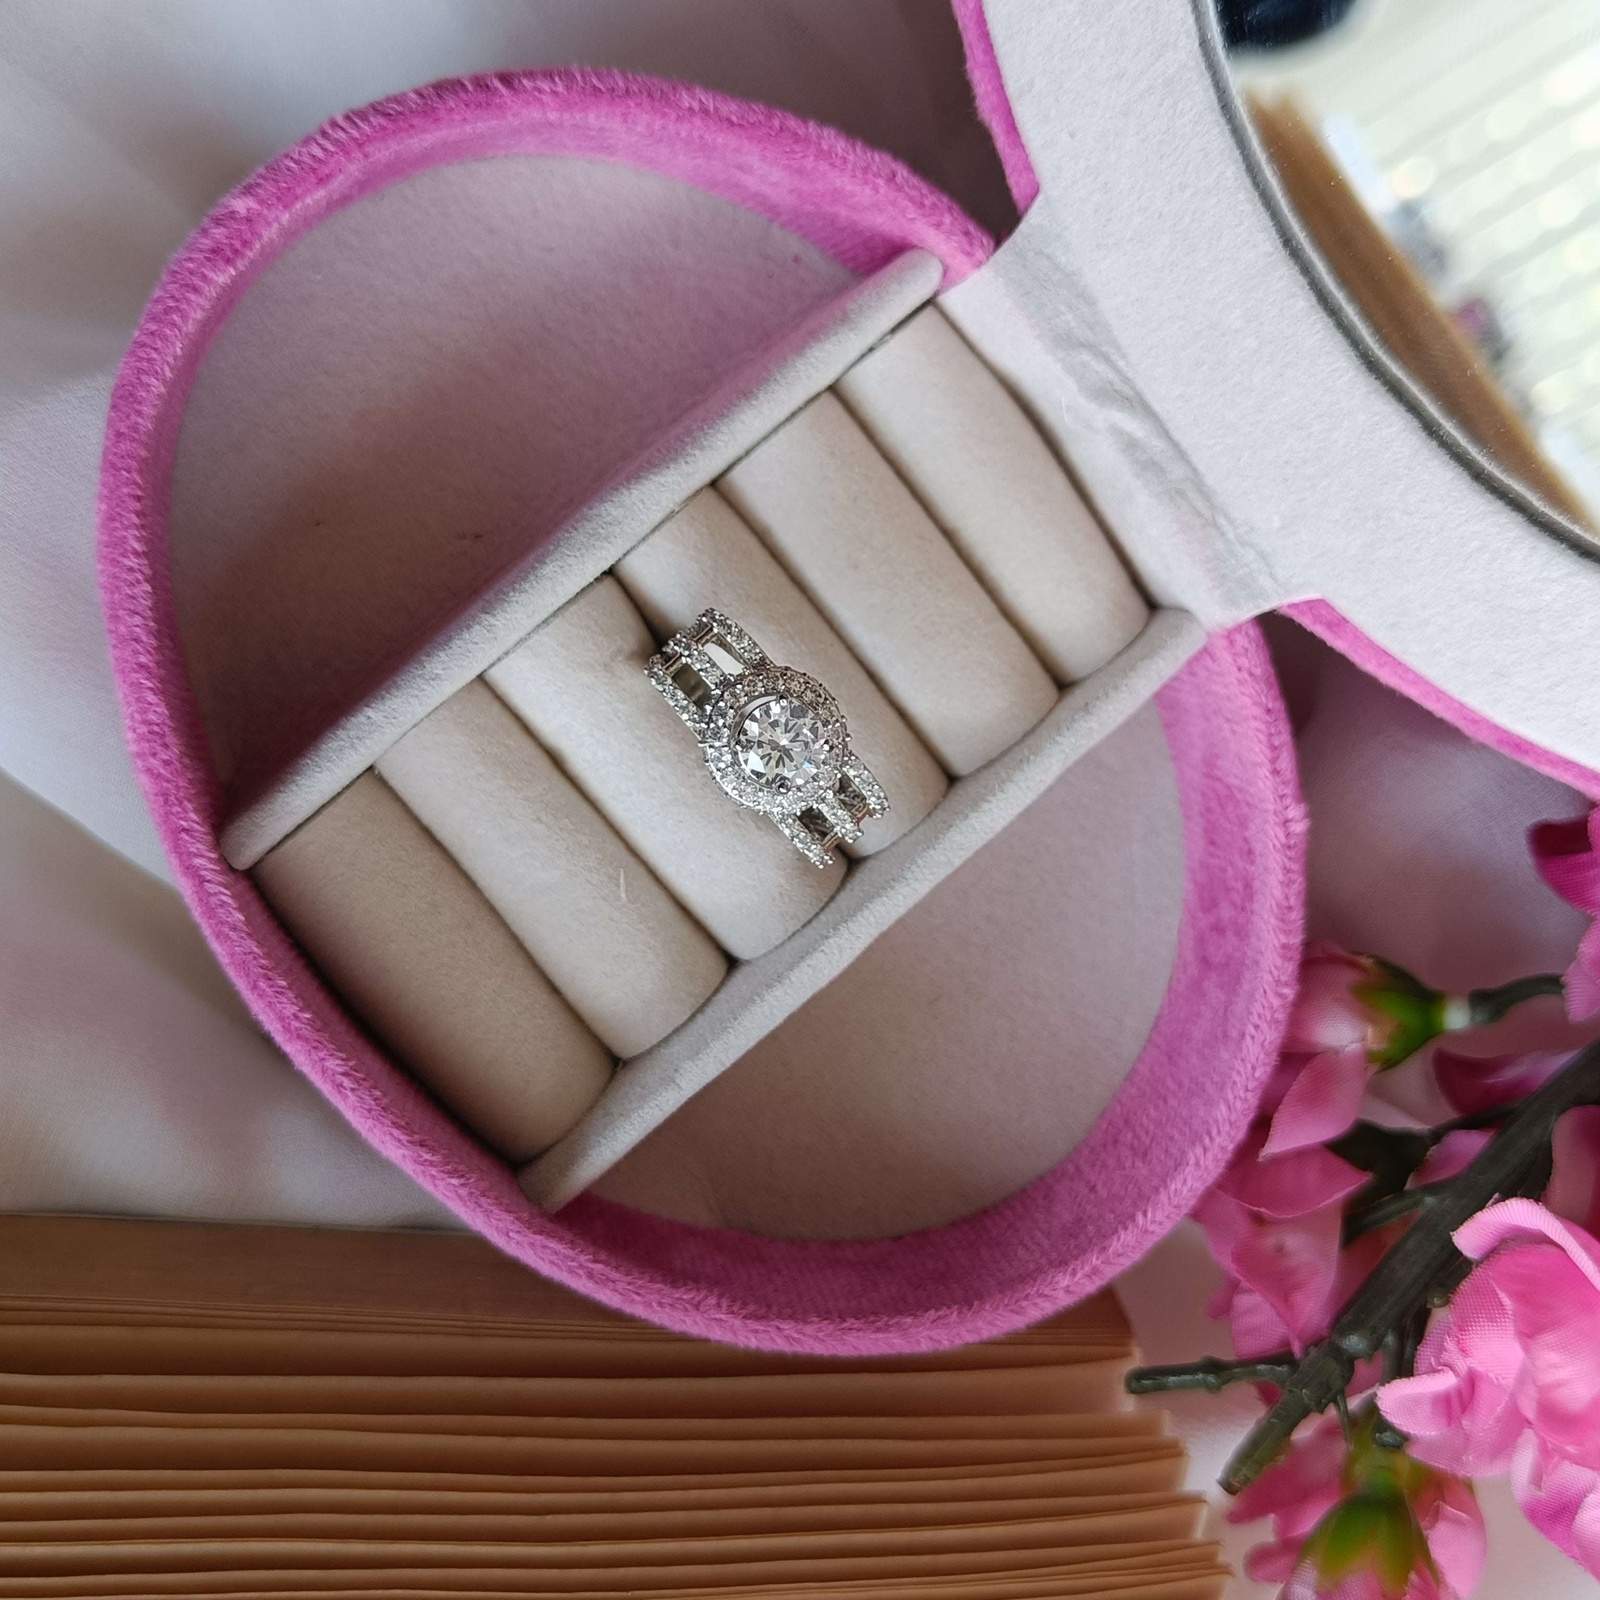 Vs sterling silver cocktail ring 098